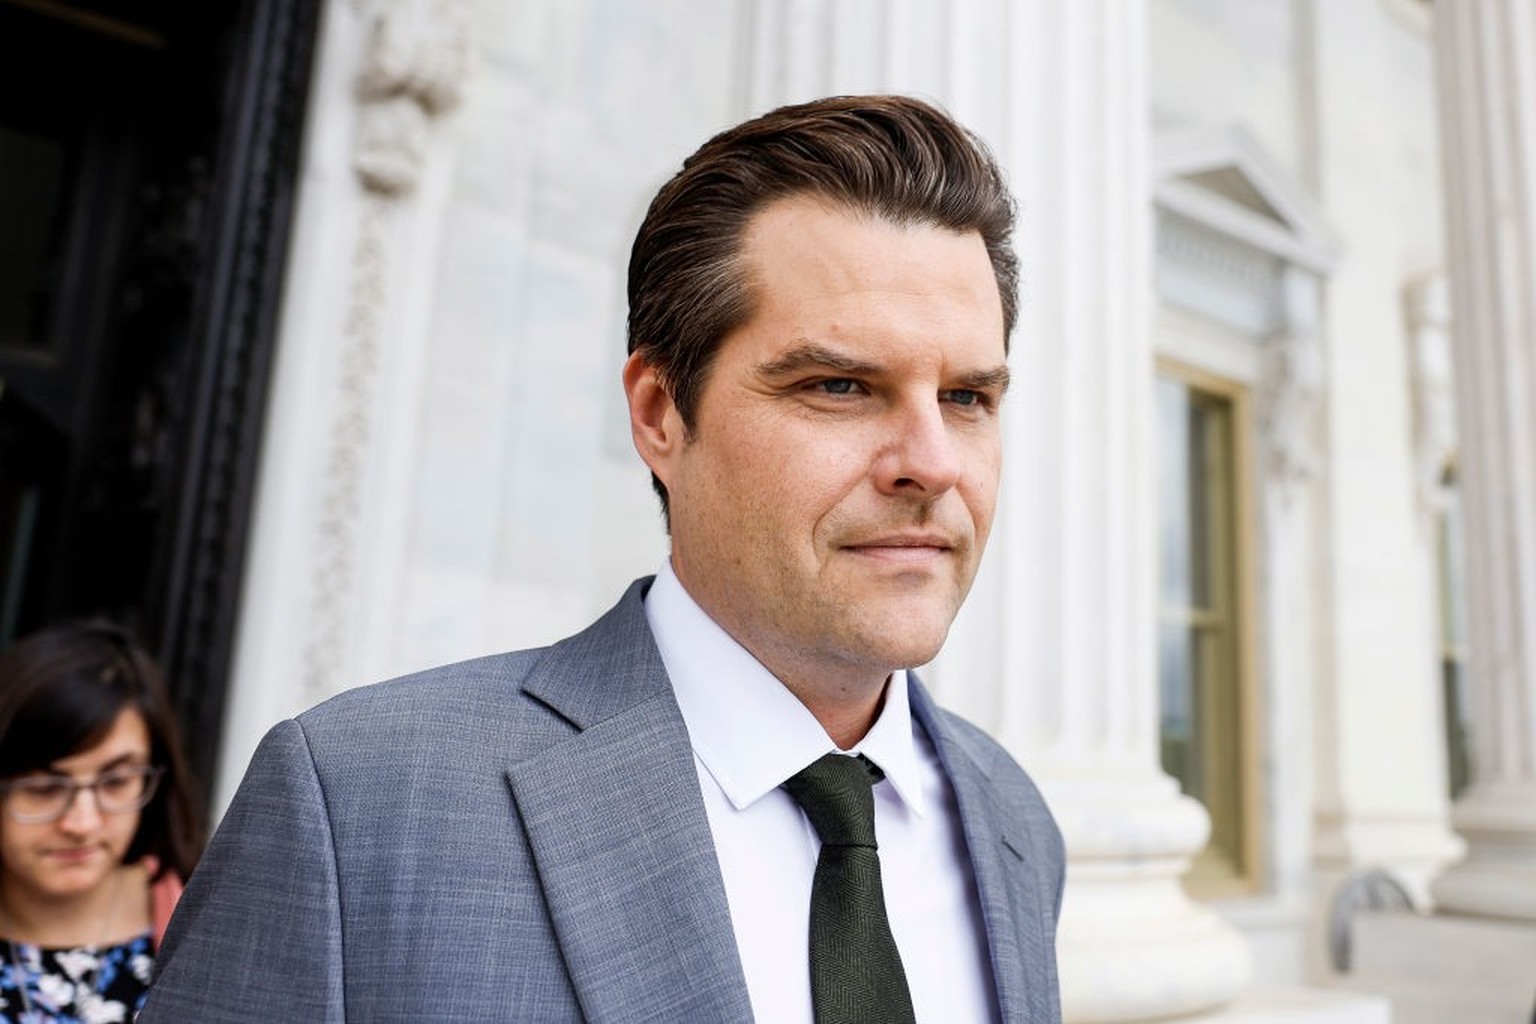 WASHINGTON, DC - SEPTEMBER 29: Rep. Matt Gaetz (R-FL) departs from the U.S. Capitol Building on September 29, 2023 in Washington, DC. The House of Representatives failed to pass a temporary funding bi ...